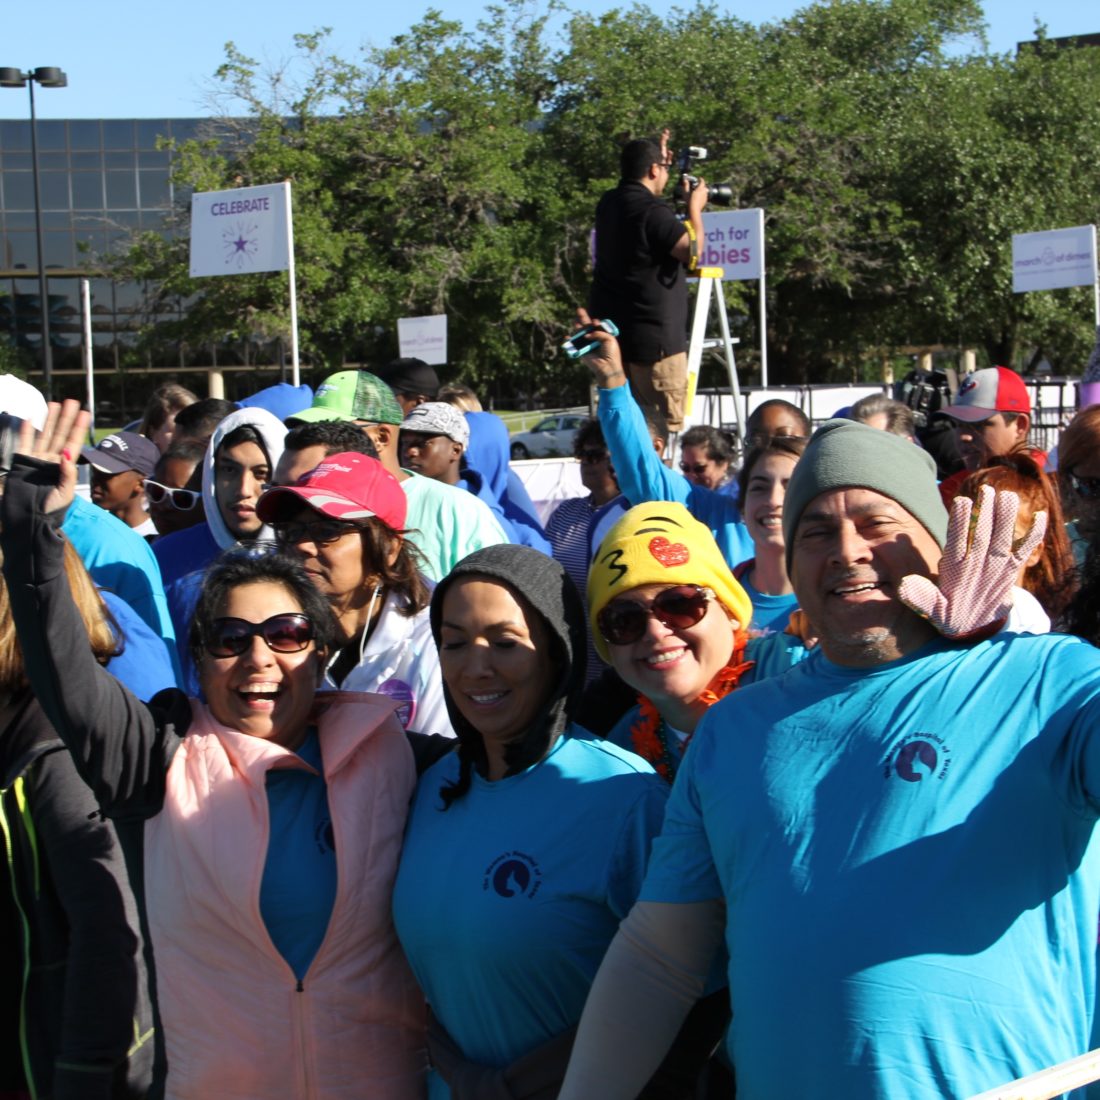 A group of people participating in a charity walk